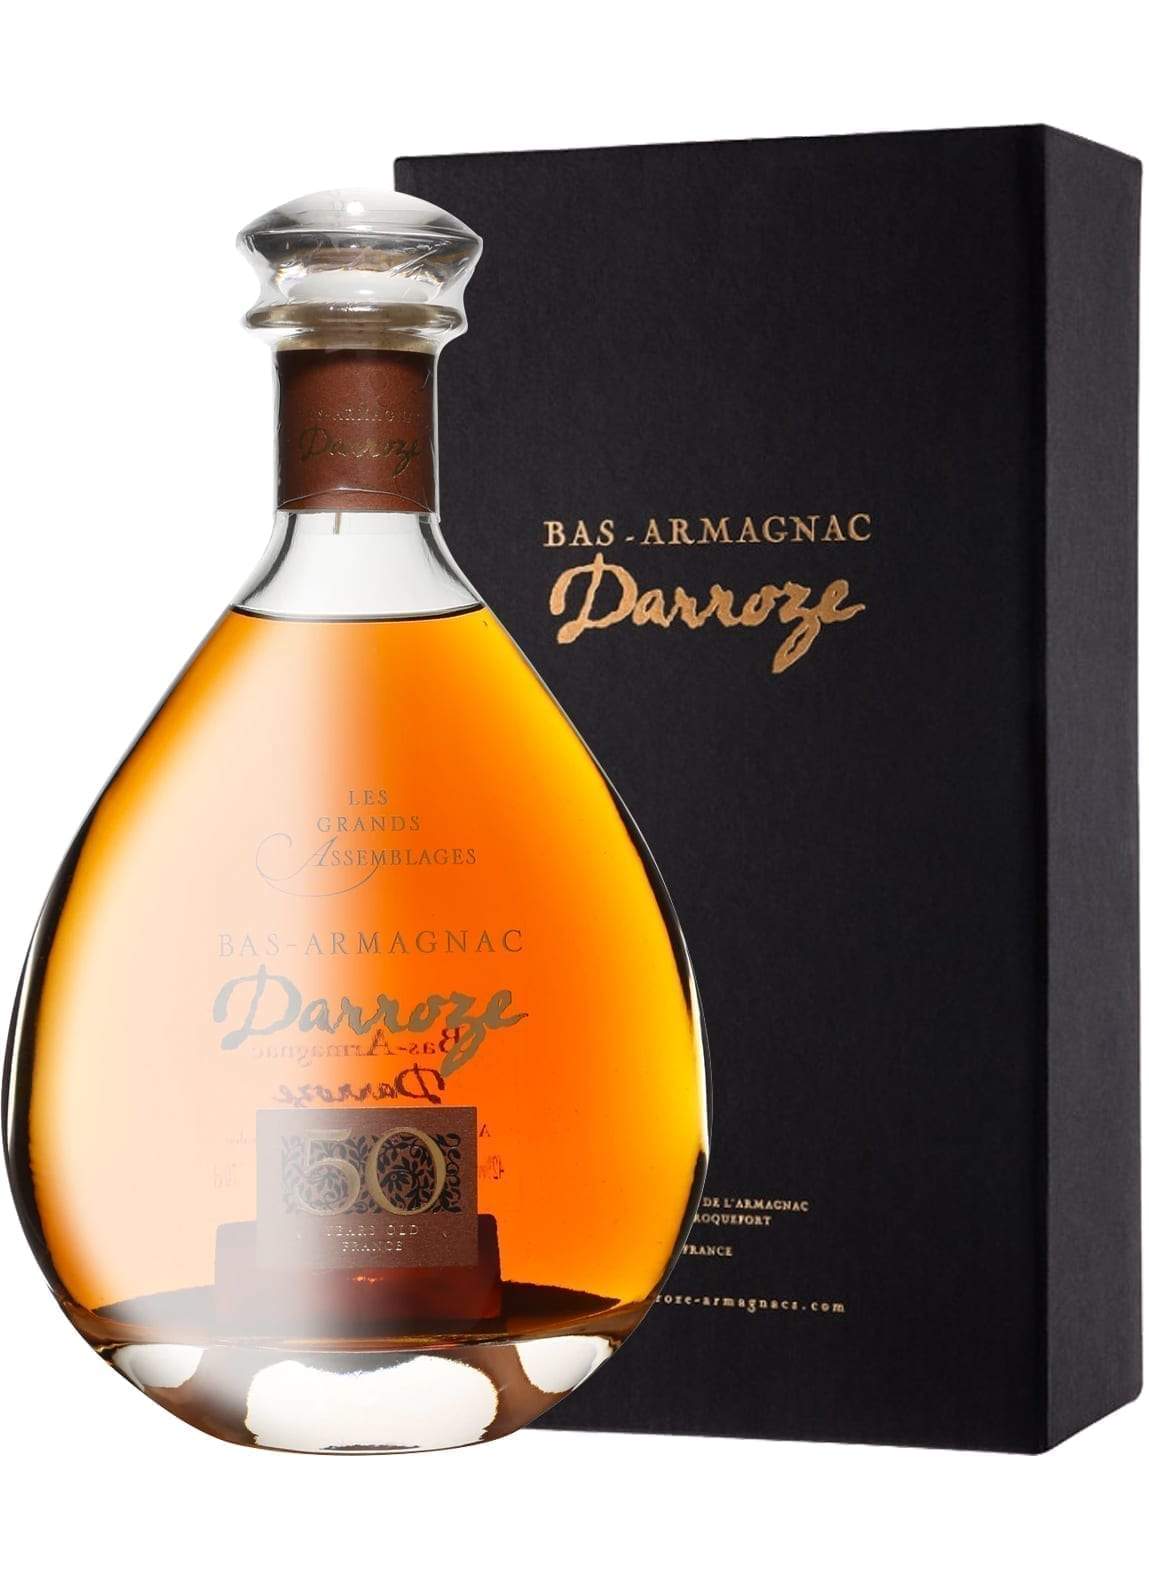 Darroze Grand Bas Armagnac Les Grands Assemblages 50 years Carafe 42% 700ml | Brandy | Shop online at Spirits of France